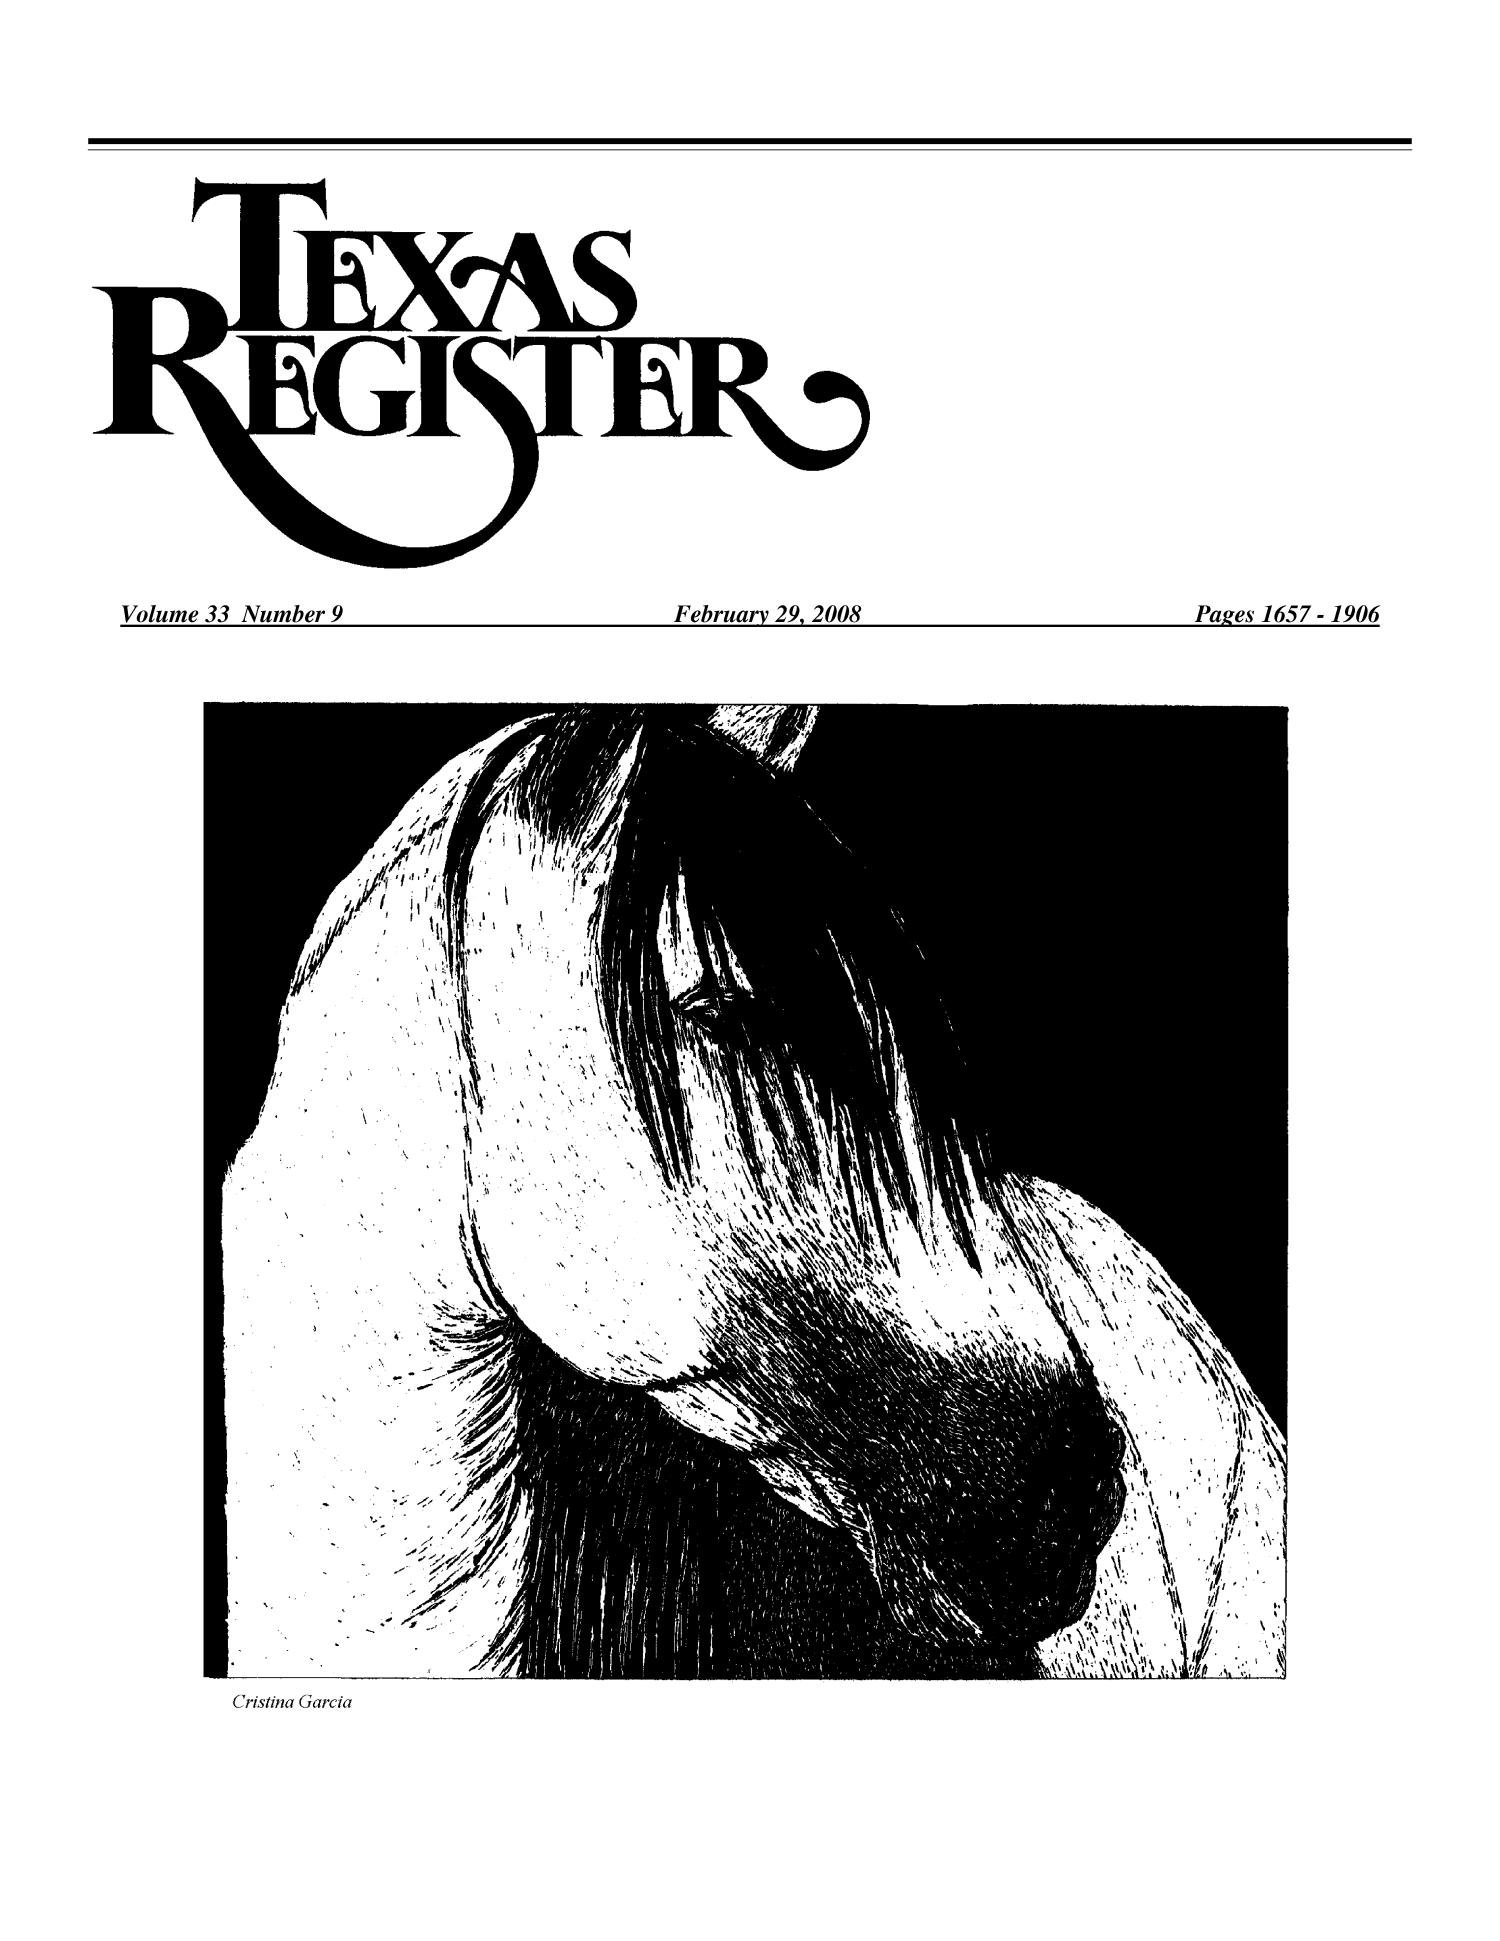 Texas Register, Volume 33, Number 9, Pages 1657-1906, February 29, 2008
                                                
                                                    1657
                                                